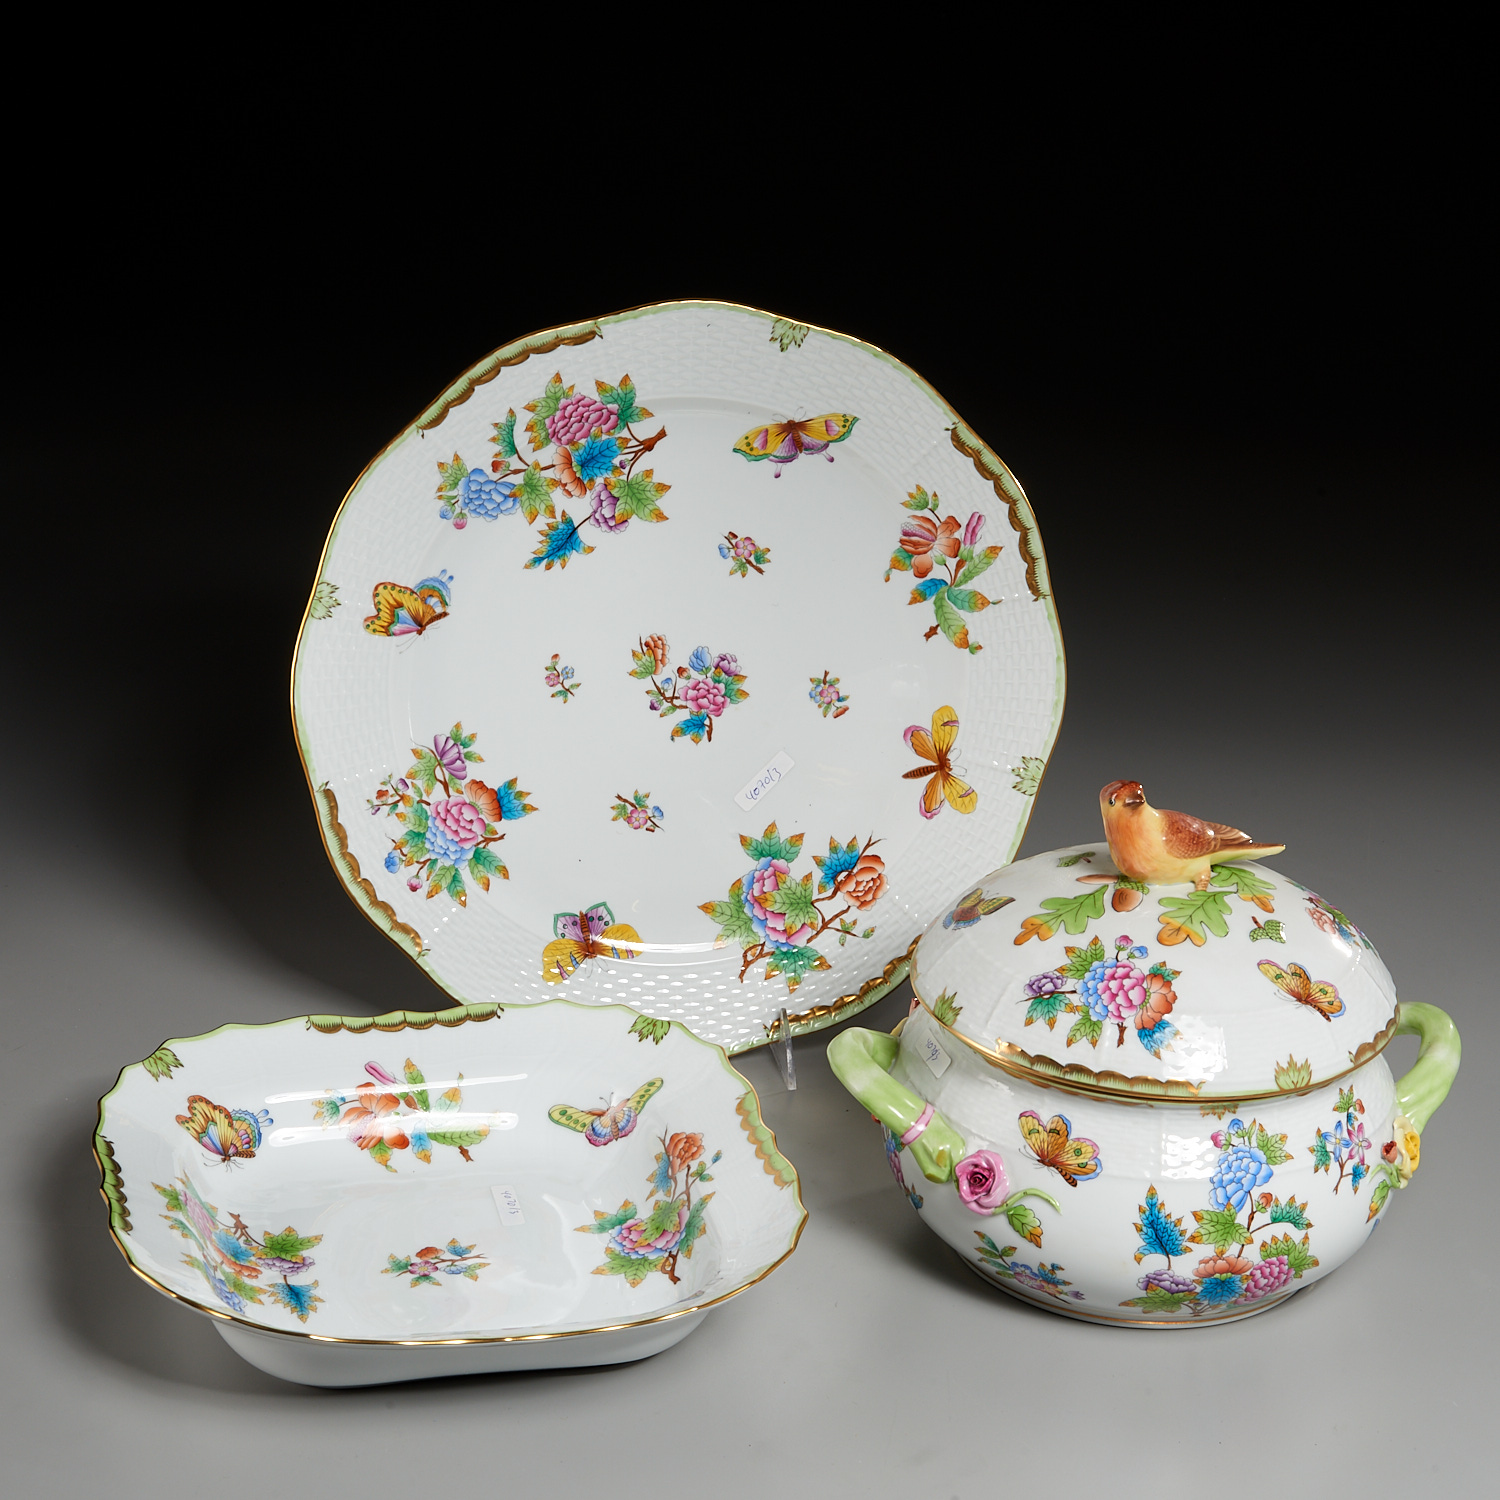 HEREND PORCELAIN TUREEN, TRAY,